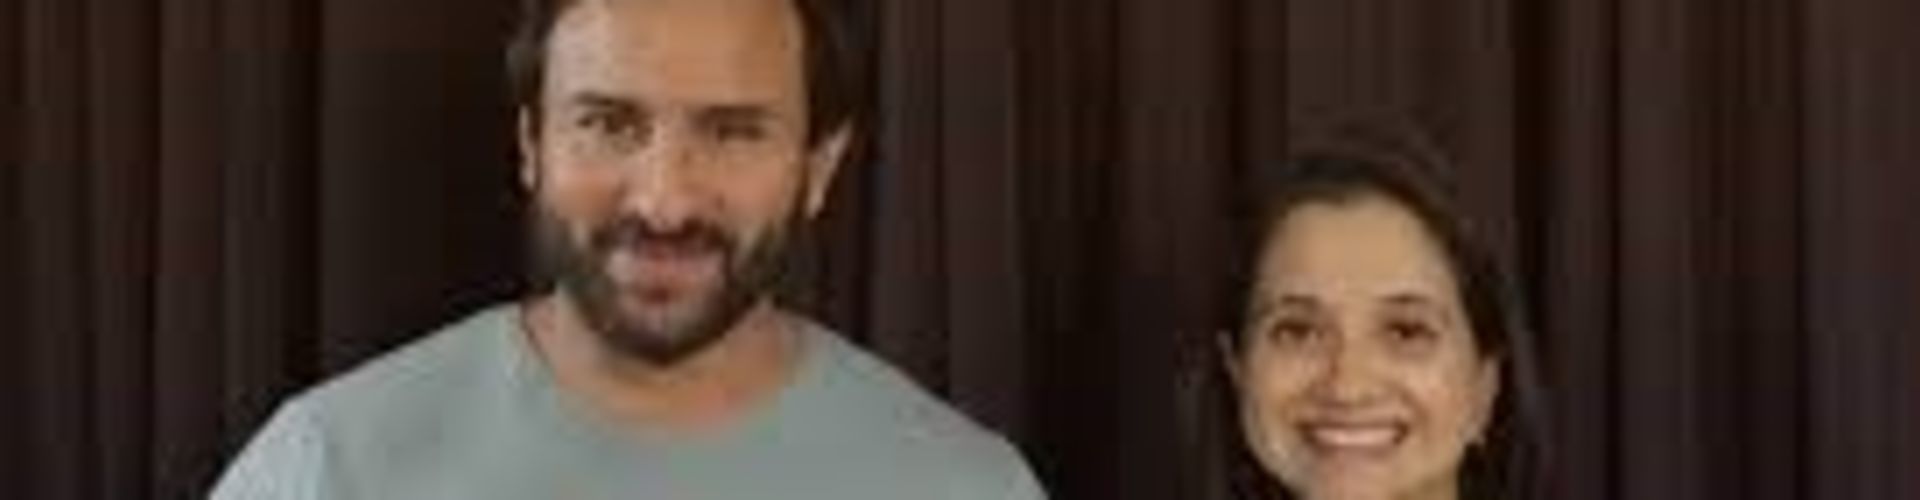 Awards shows are the biggest joke in the world and are fooling our audience says Saif Ali Khan